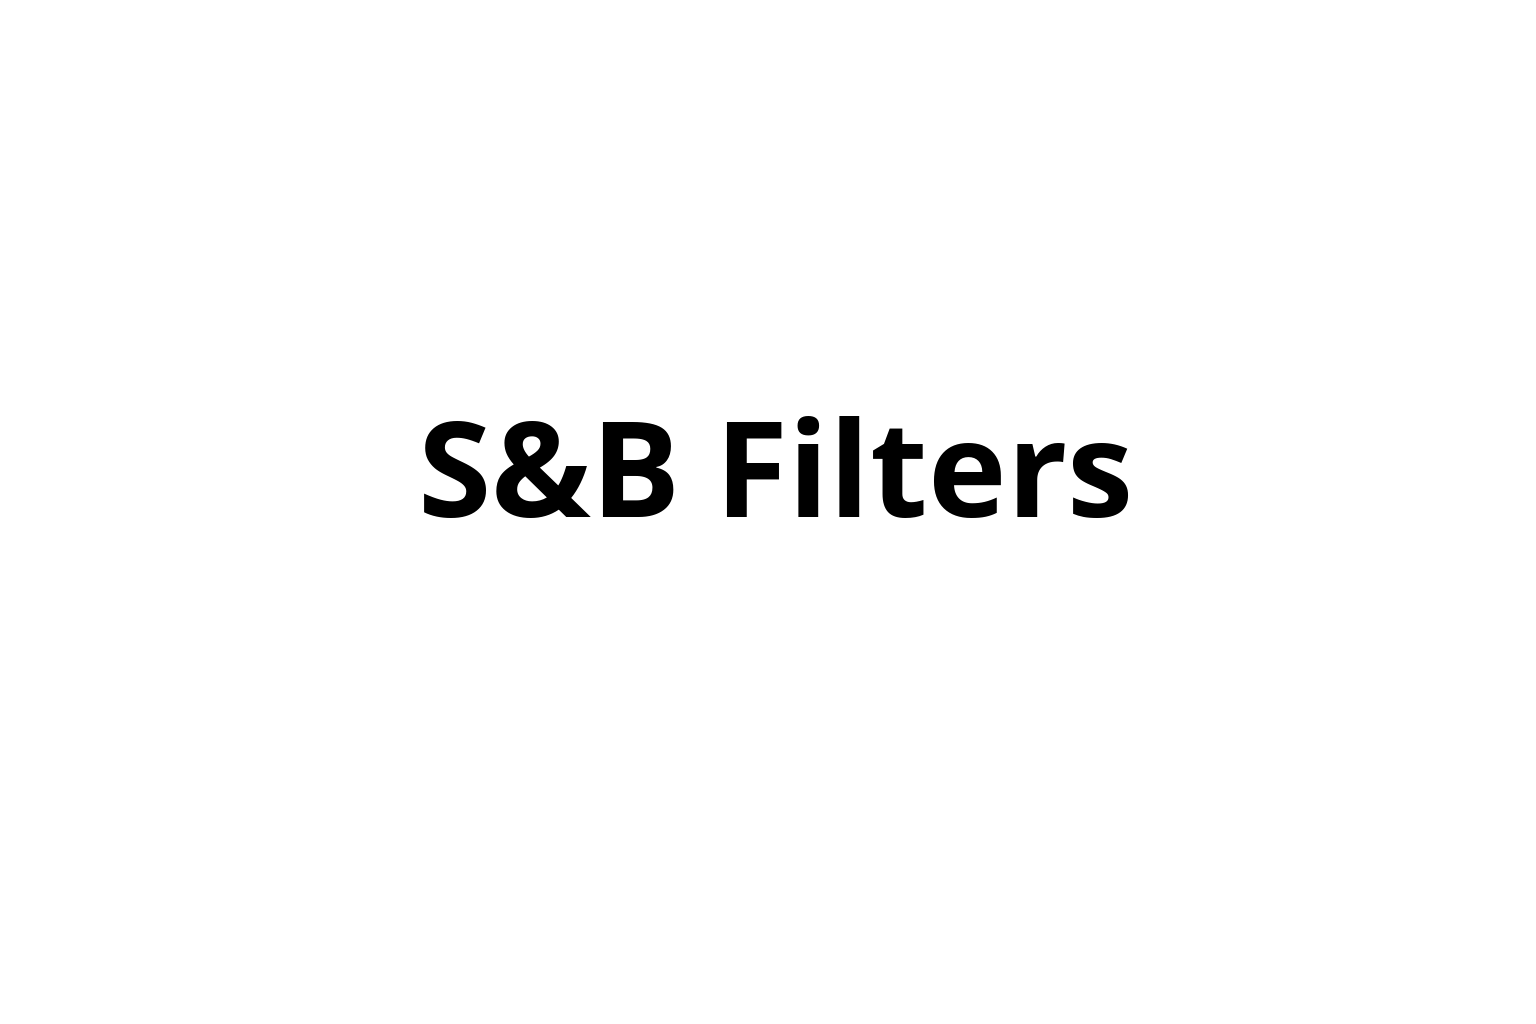 S&B Filters